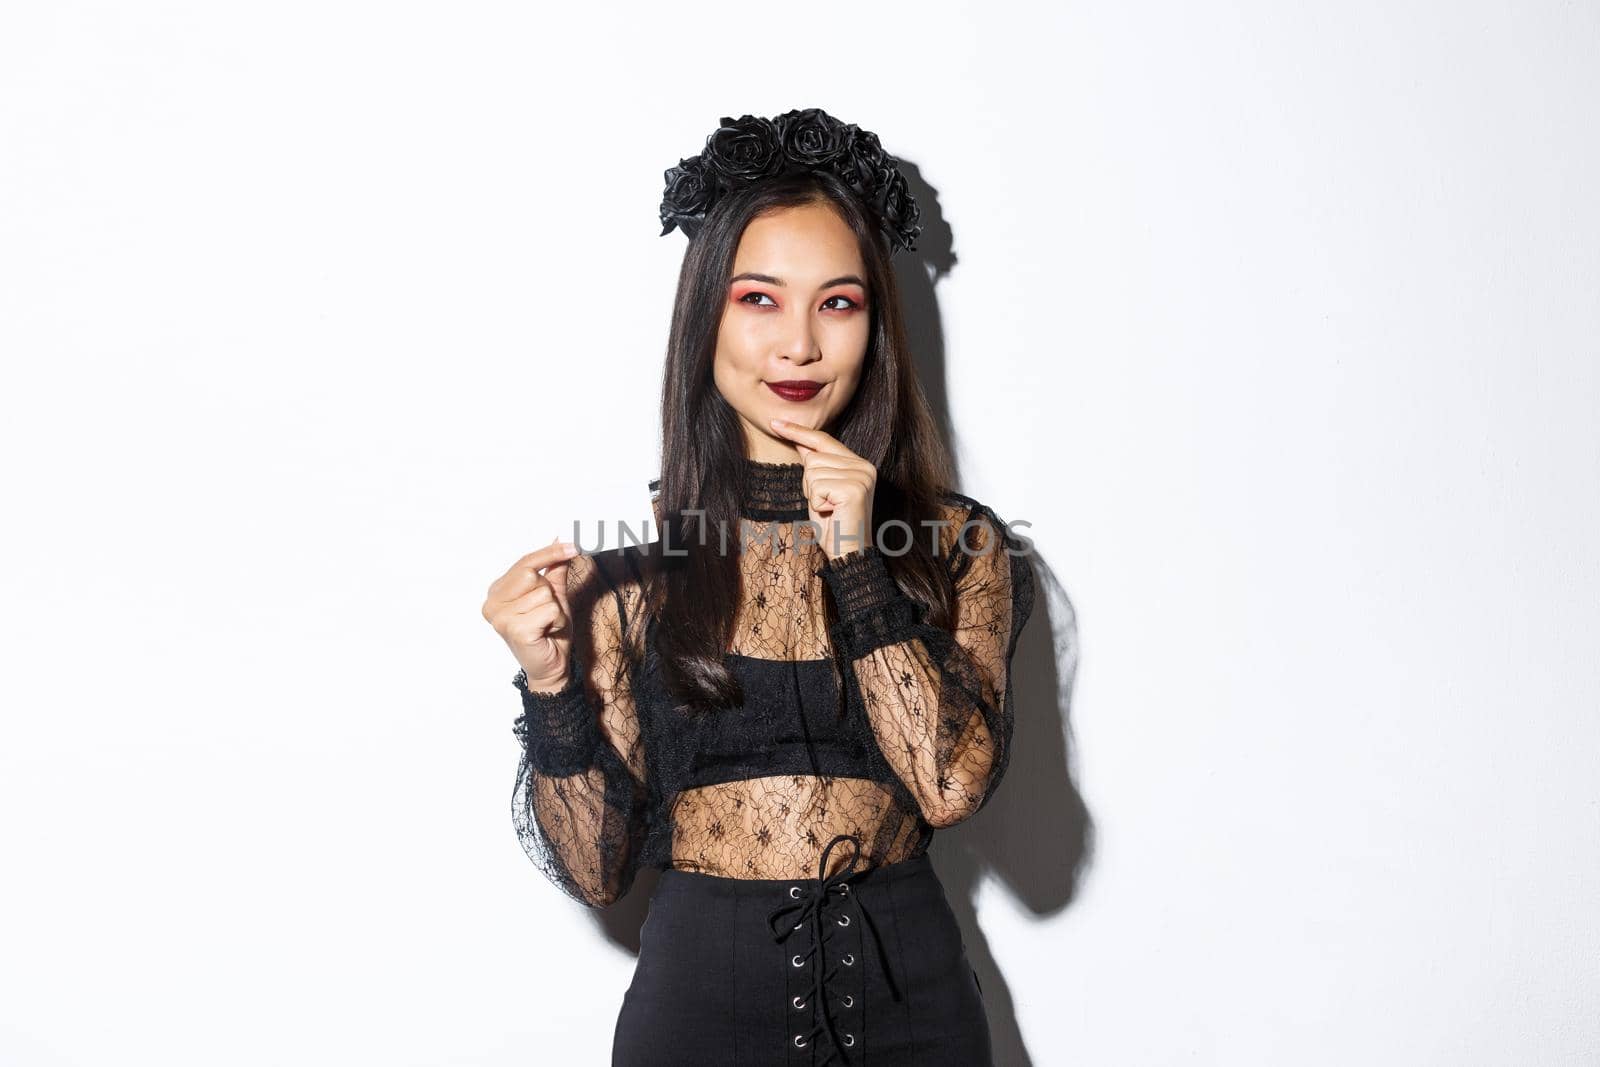 Image of smiling beautiful asian woman in gothic lace dress and wreath, thinking while holding credit card, standing over white background.